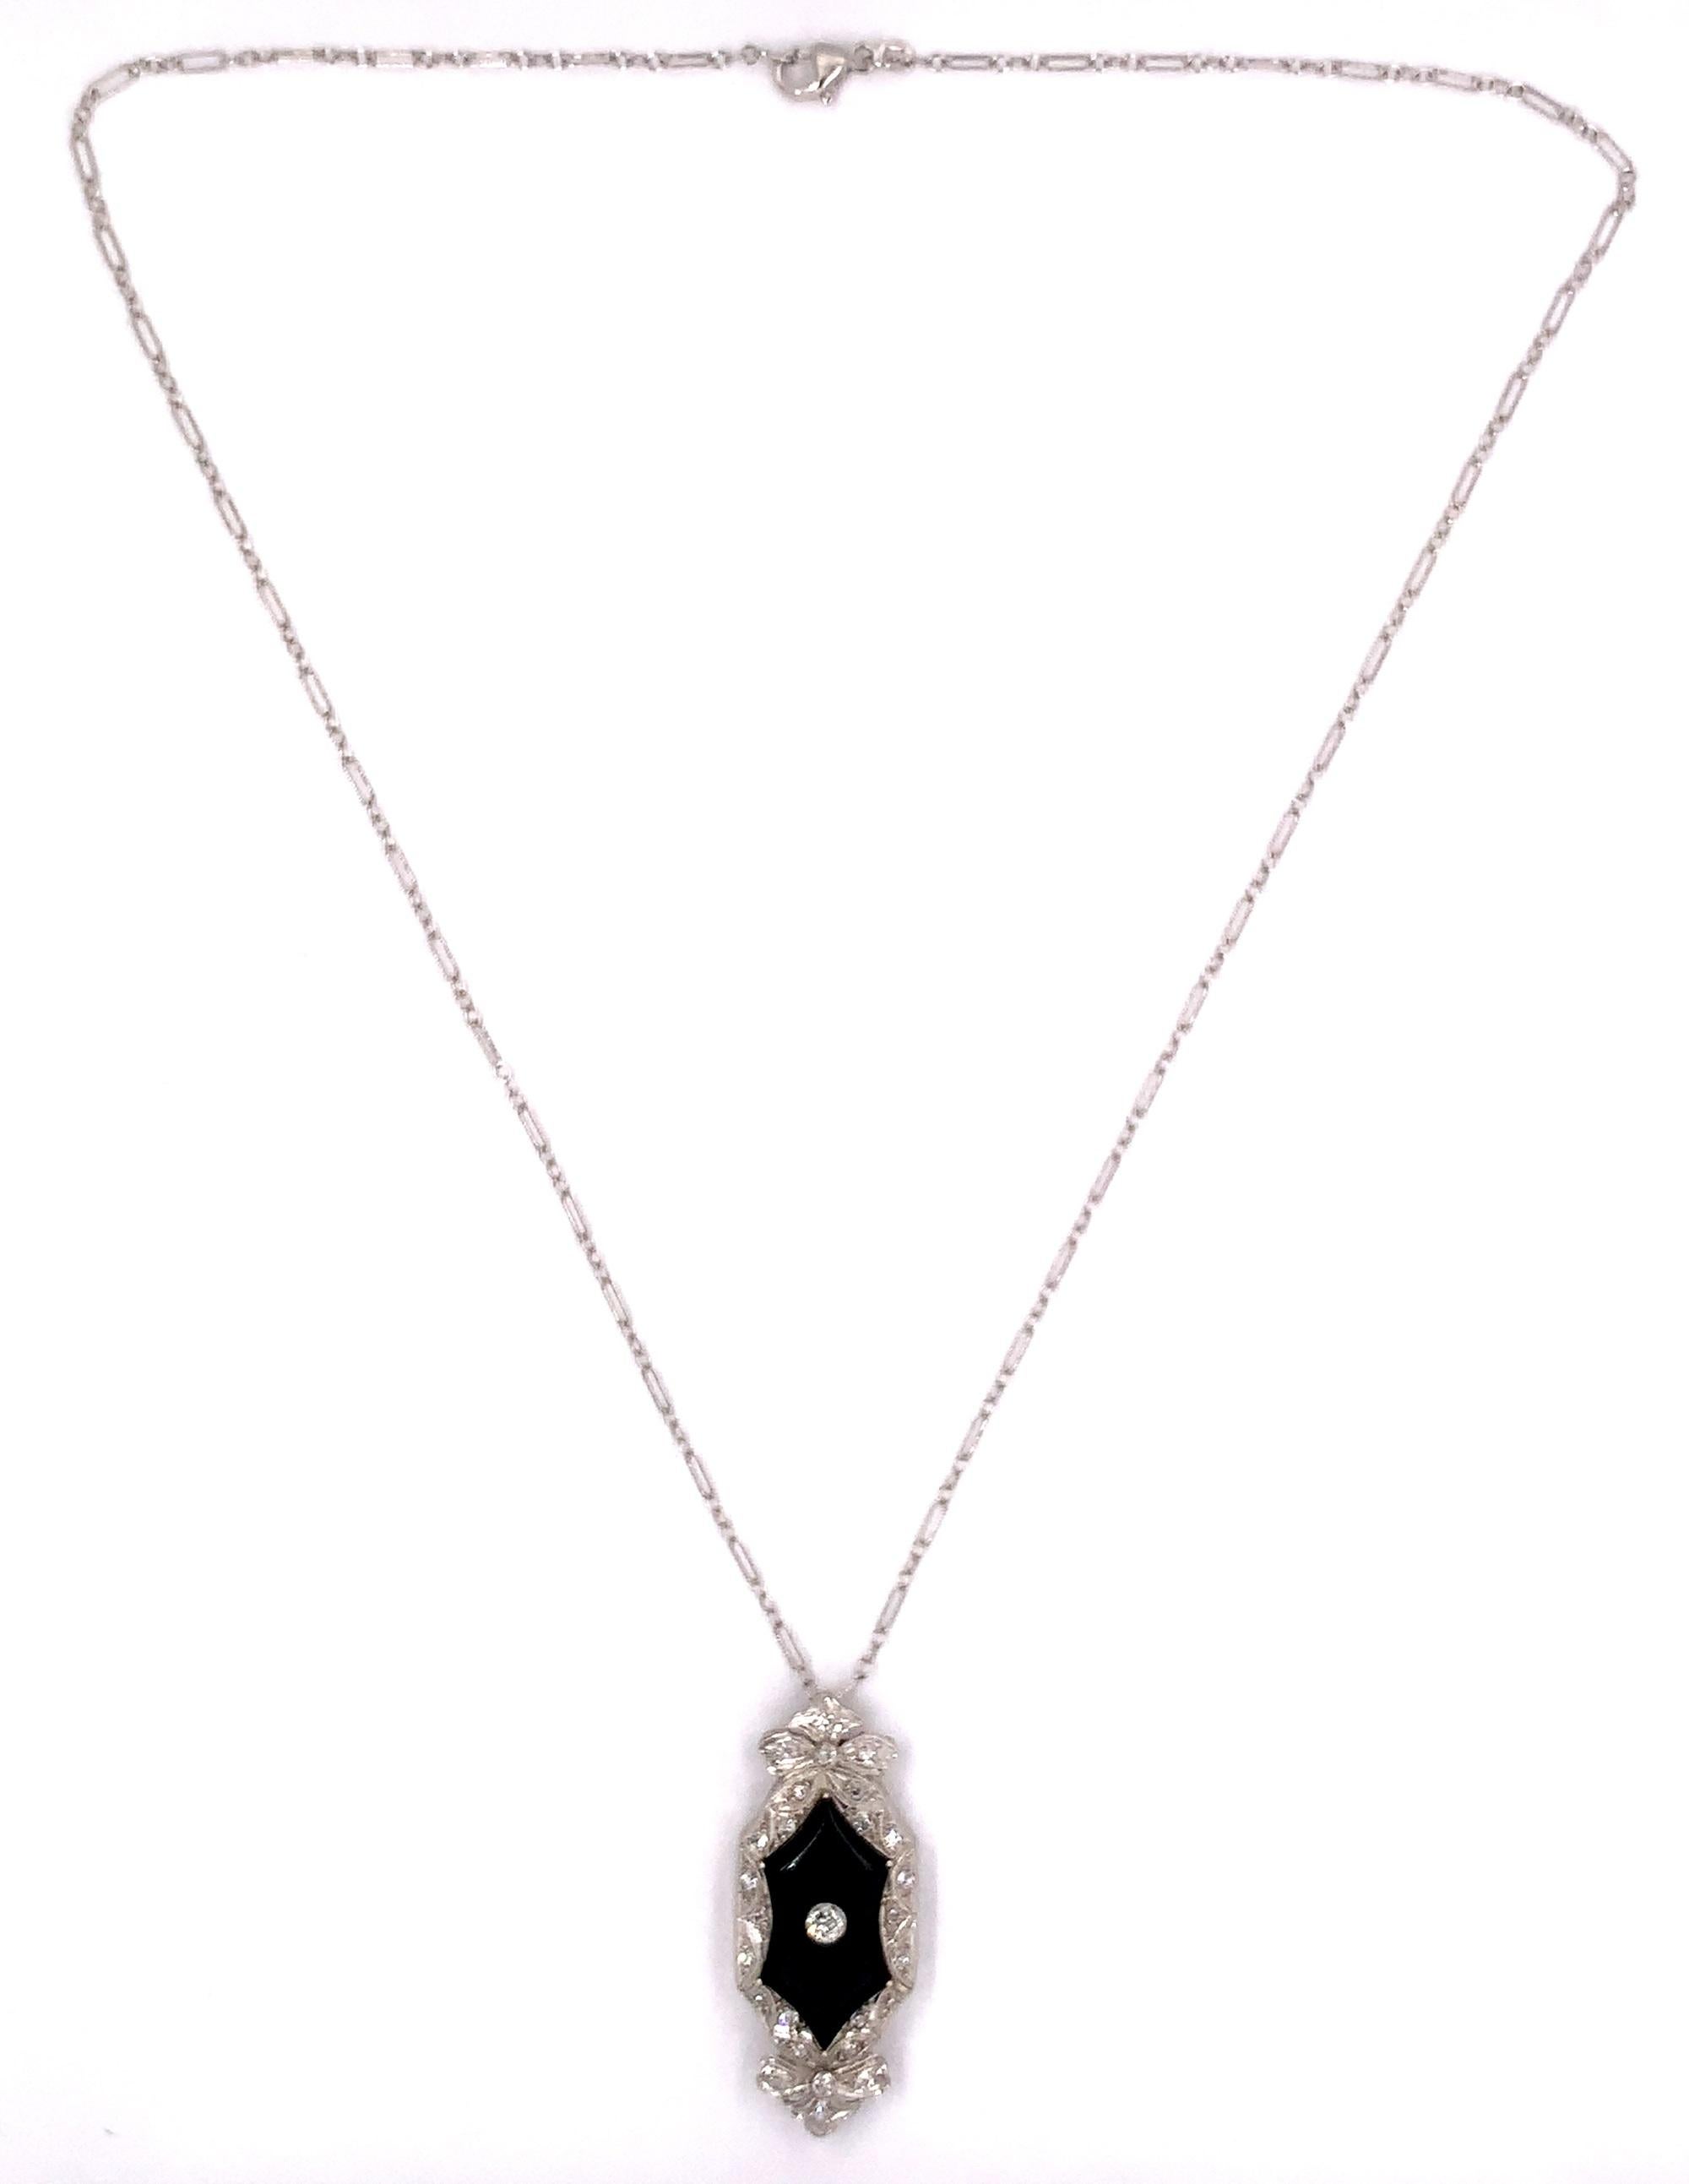 Platinum black onyx and diamond pendant with 14K white gold fancy Deco link chain. The center European cut diamond measures about 3mm and weighs .14cts. There are 26 small round mine cut side diamond weighing about 1/3ct total. The pendant is a